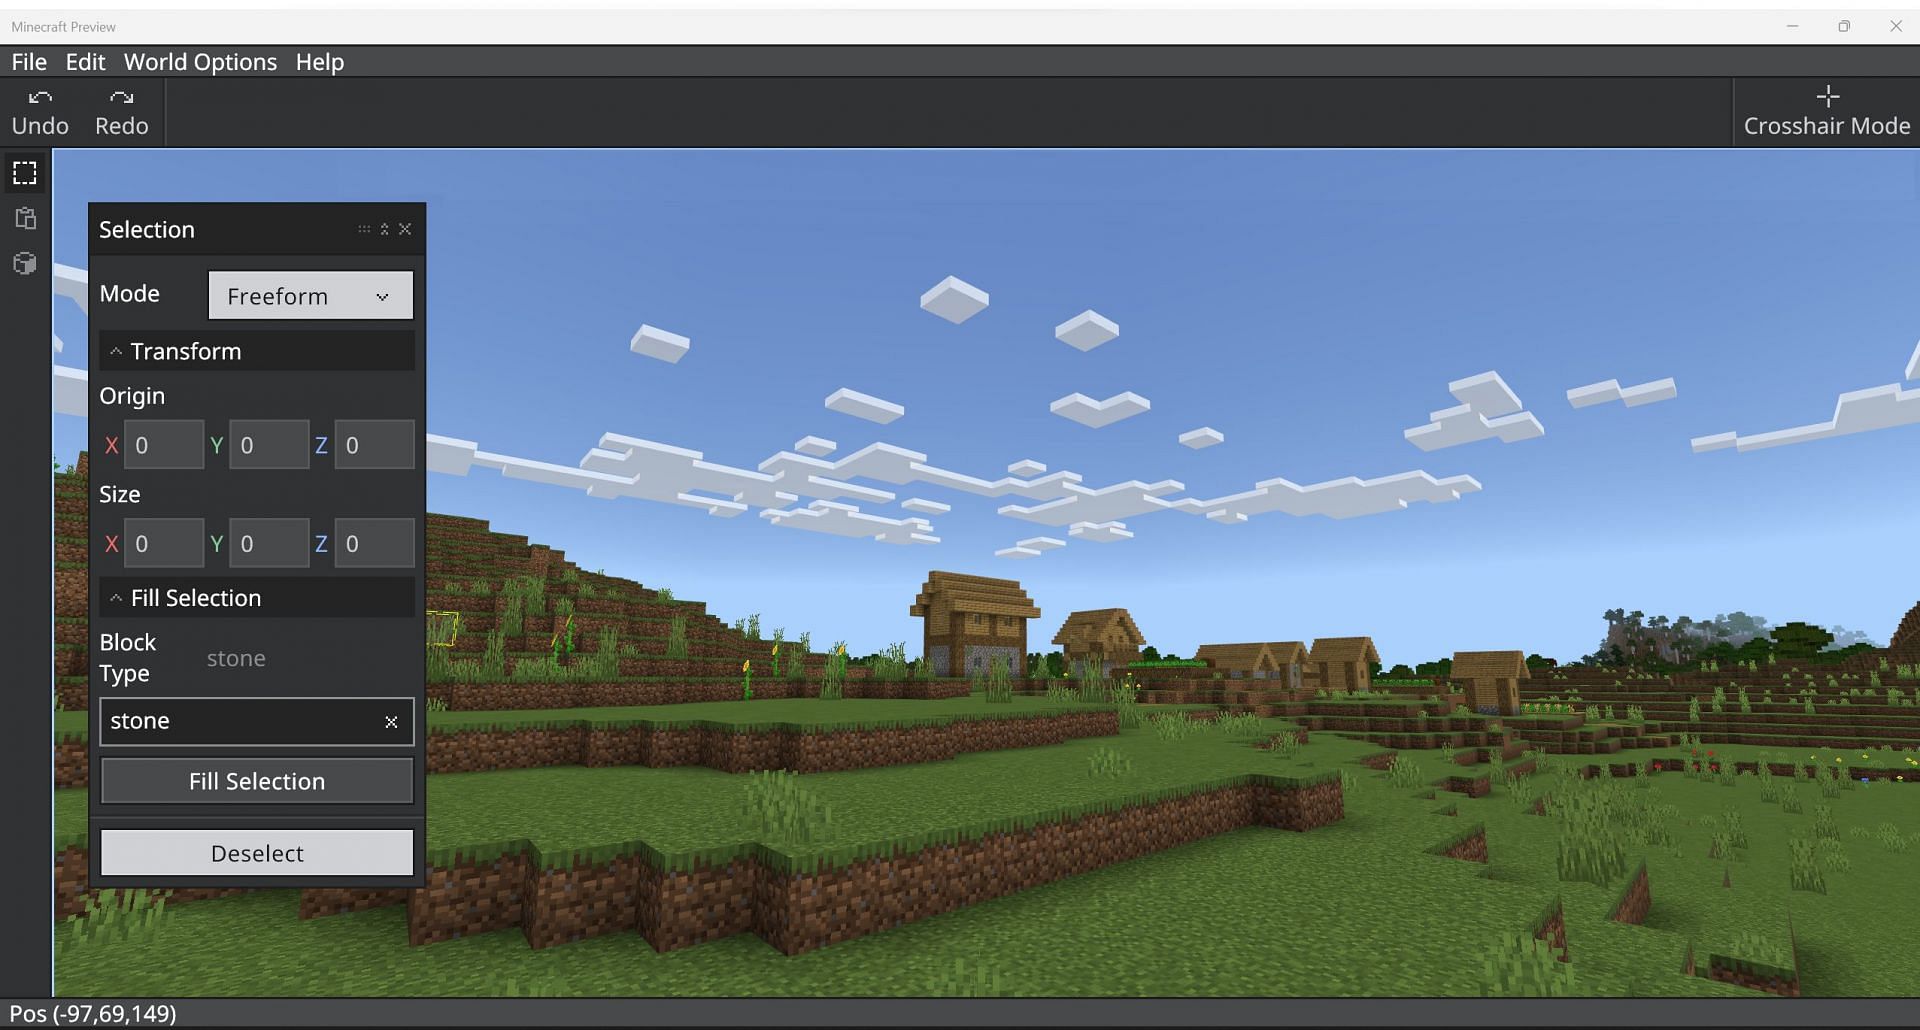 Overview of Editor mode in Minecraft Bedrock (Image via Mojang/Microsoft) 